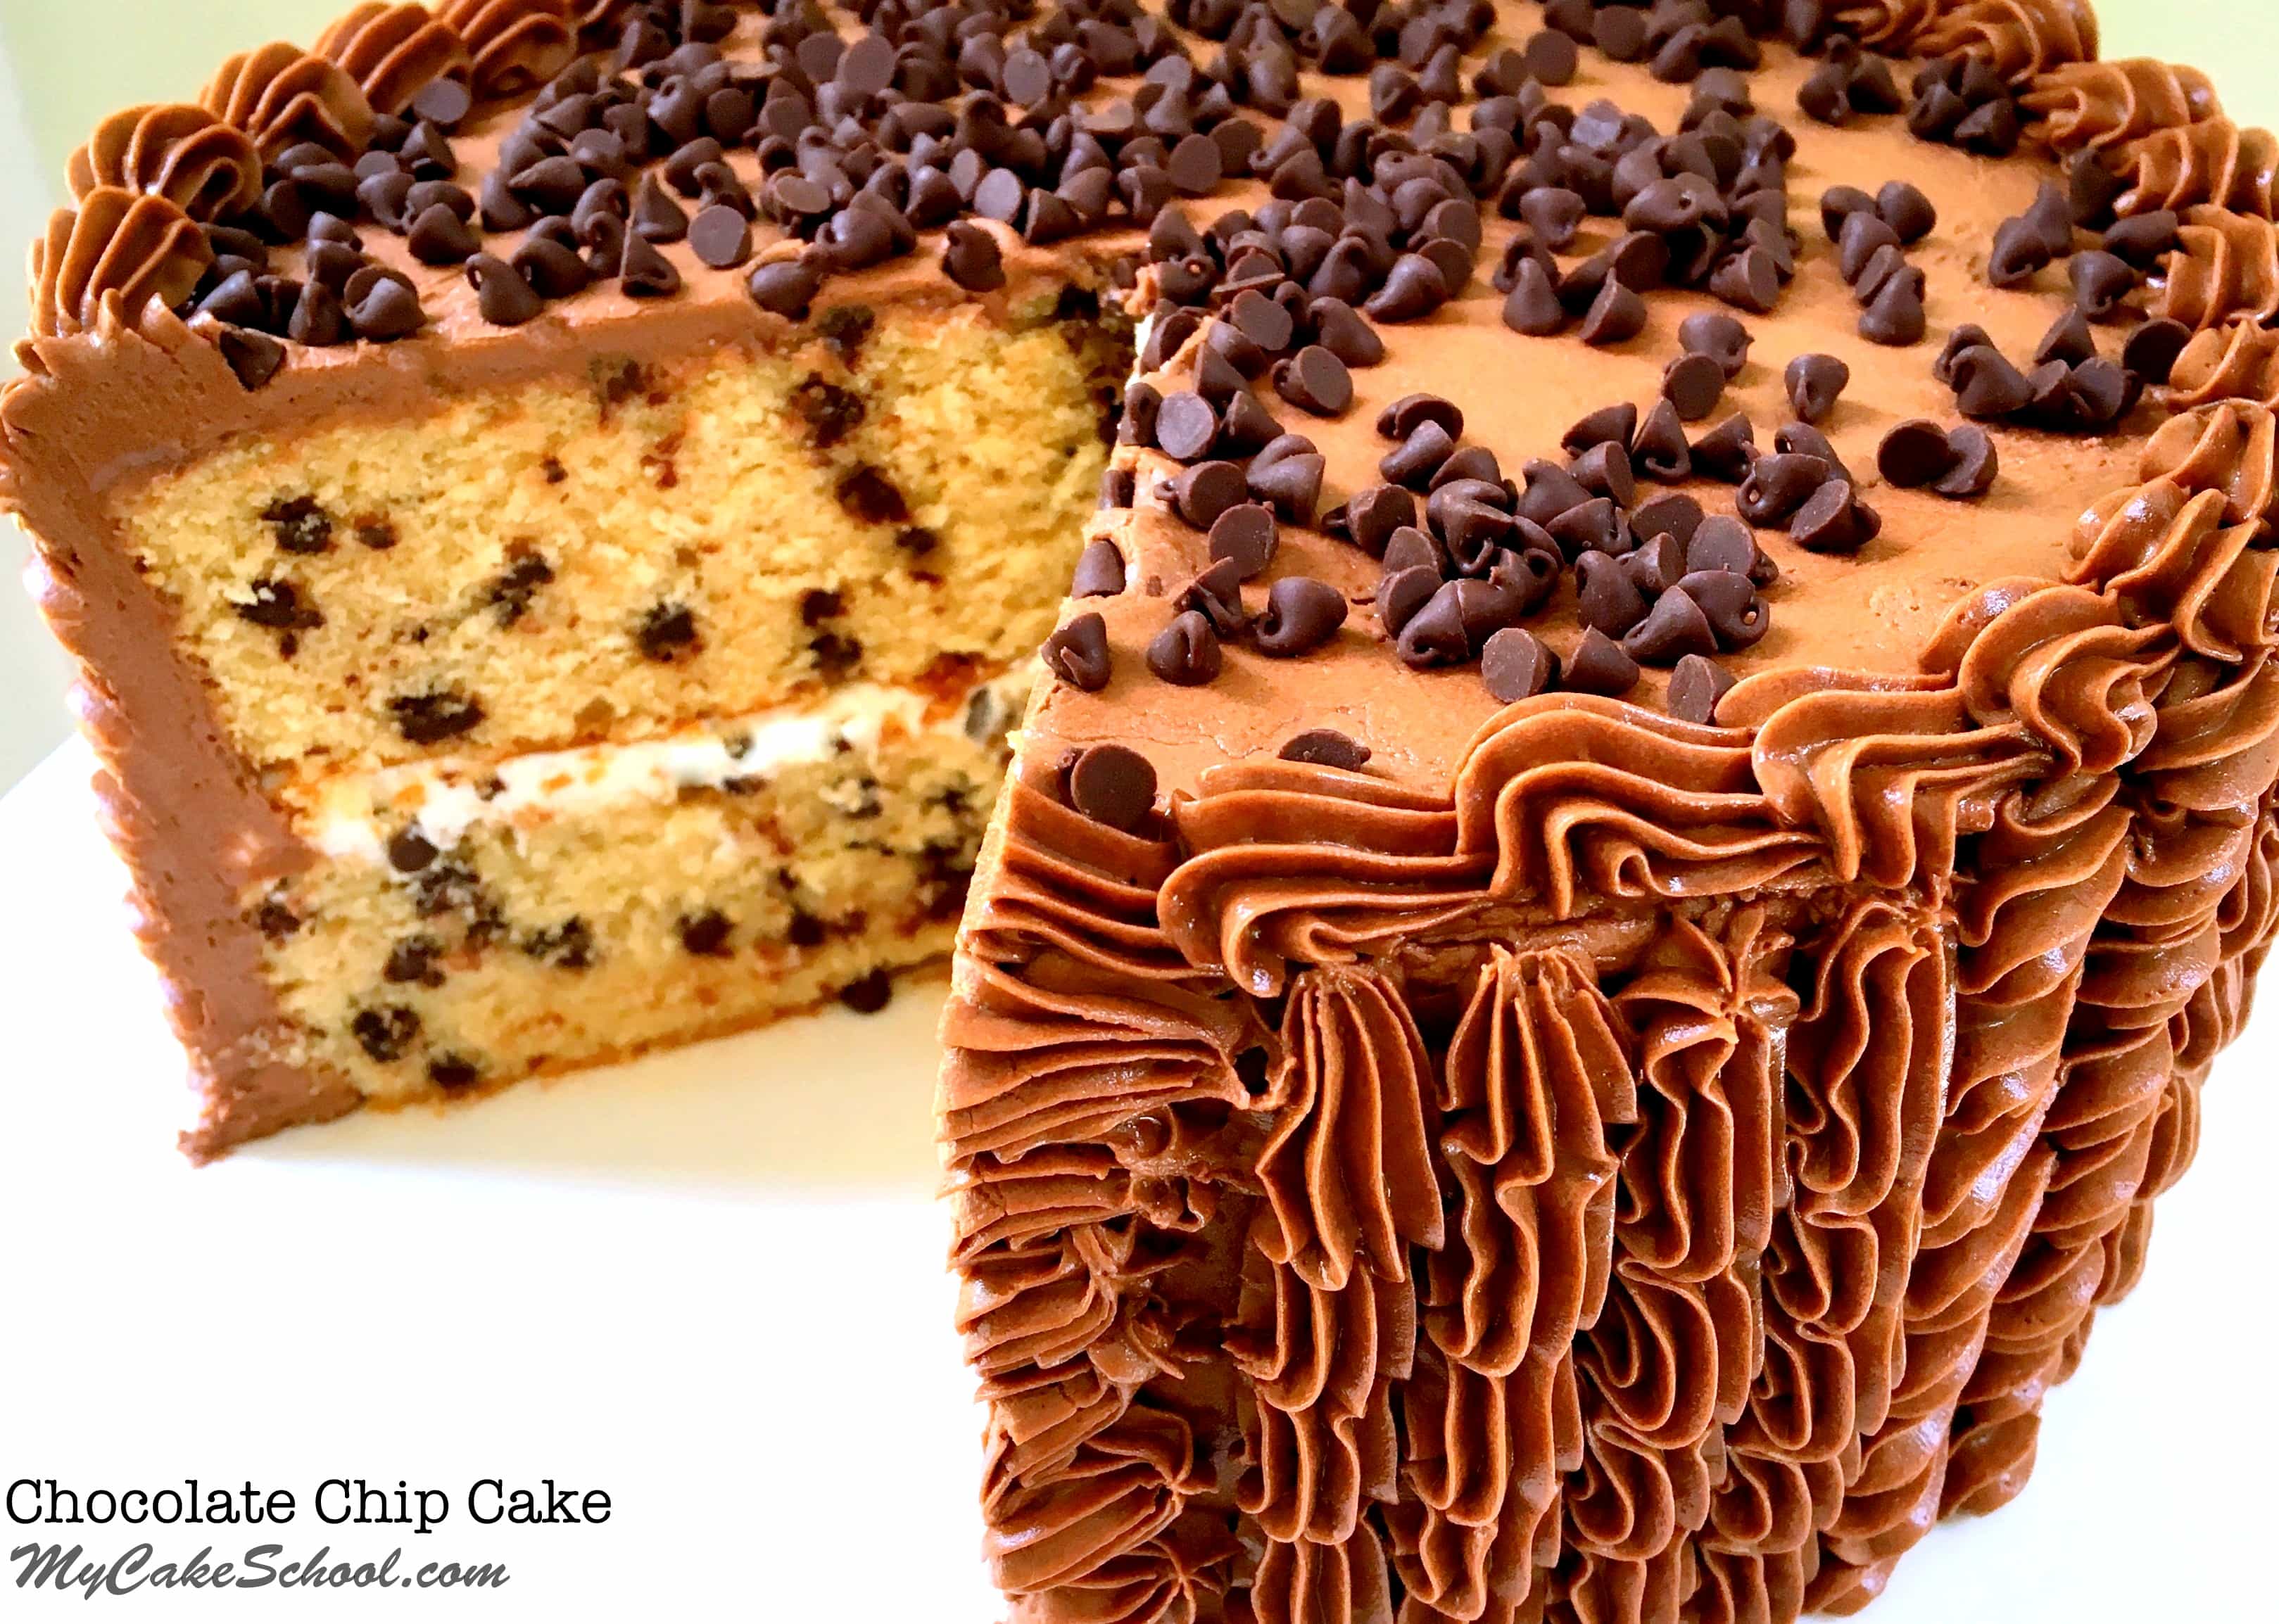 Delicious Chocolate Chip Cake Recipe from Scratch! Moist, delicious, and flavorful cake recipe by MyCakeSchool.com.